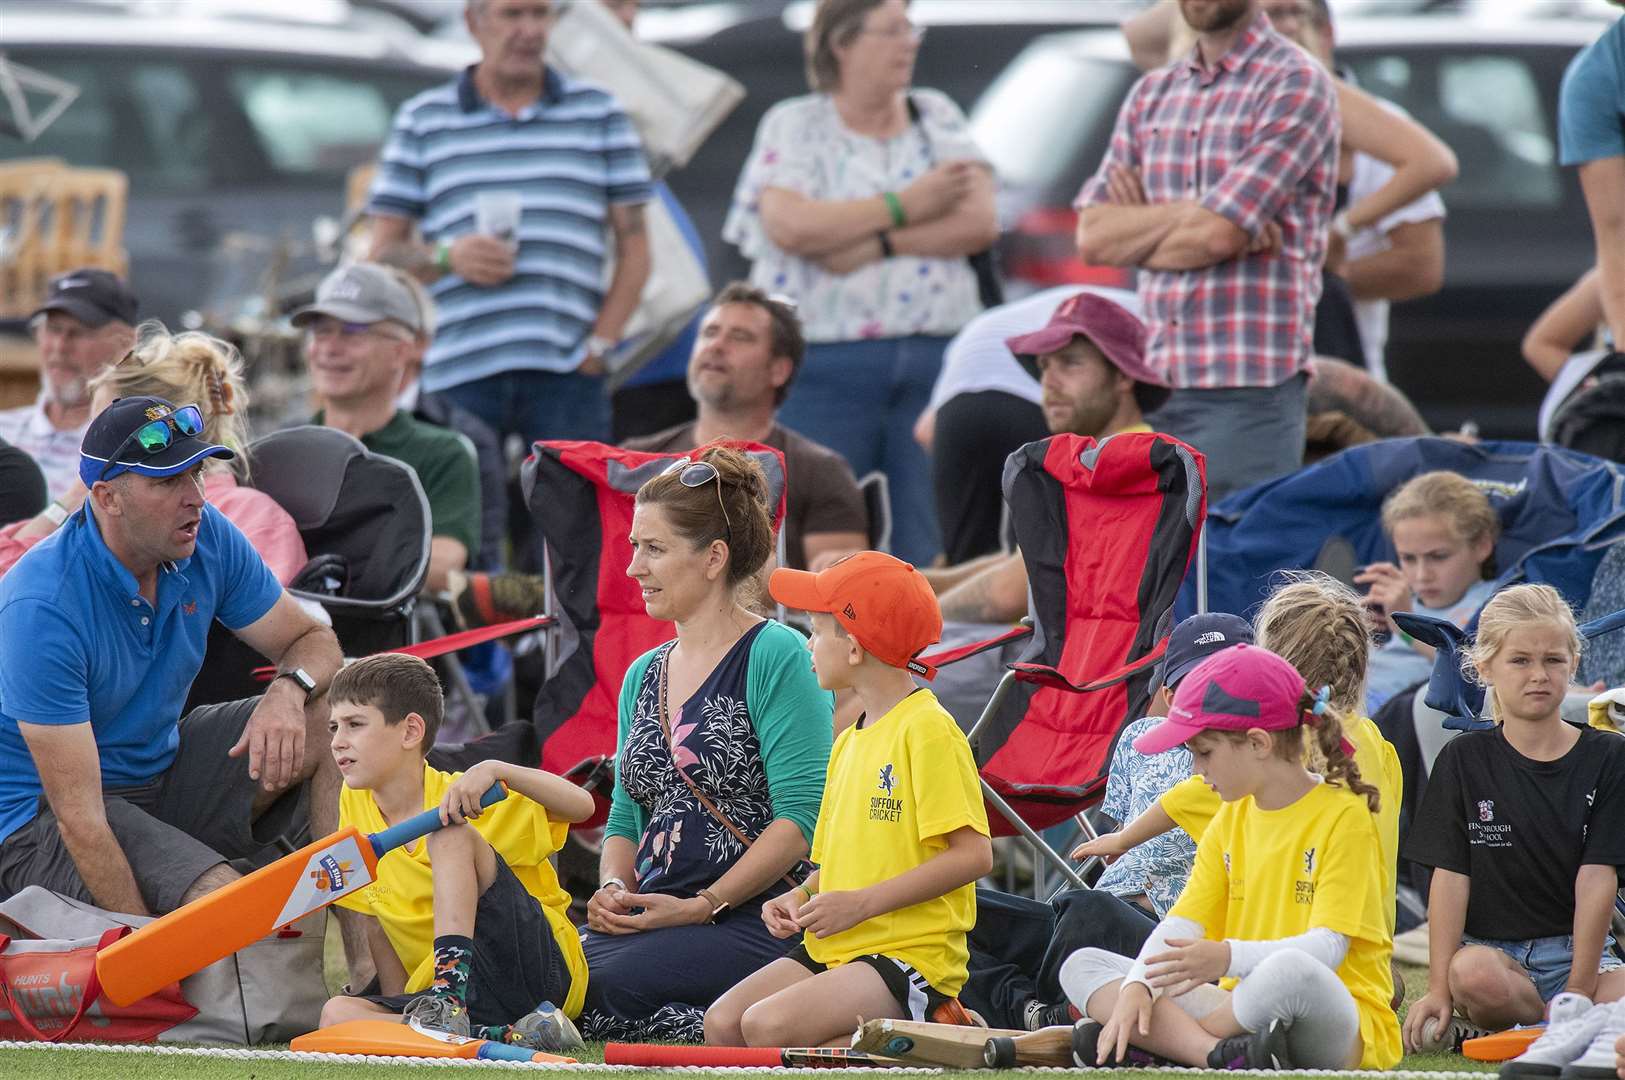 Fans watching on. Picture: Mark Westley